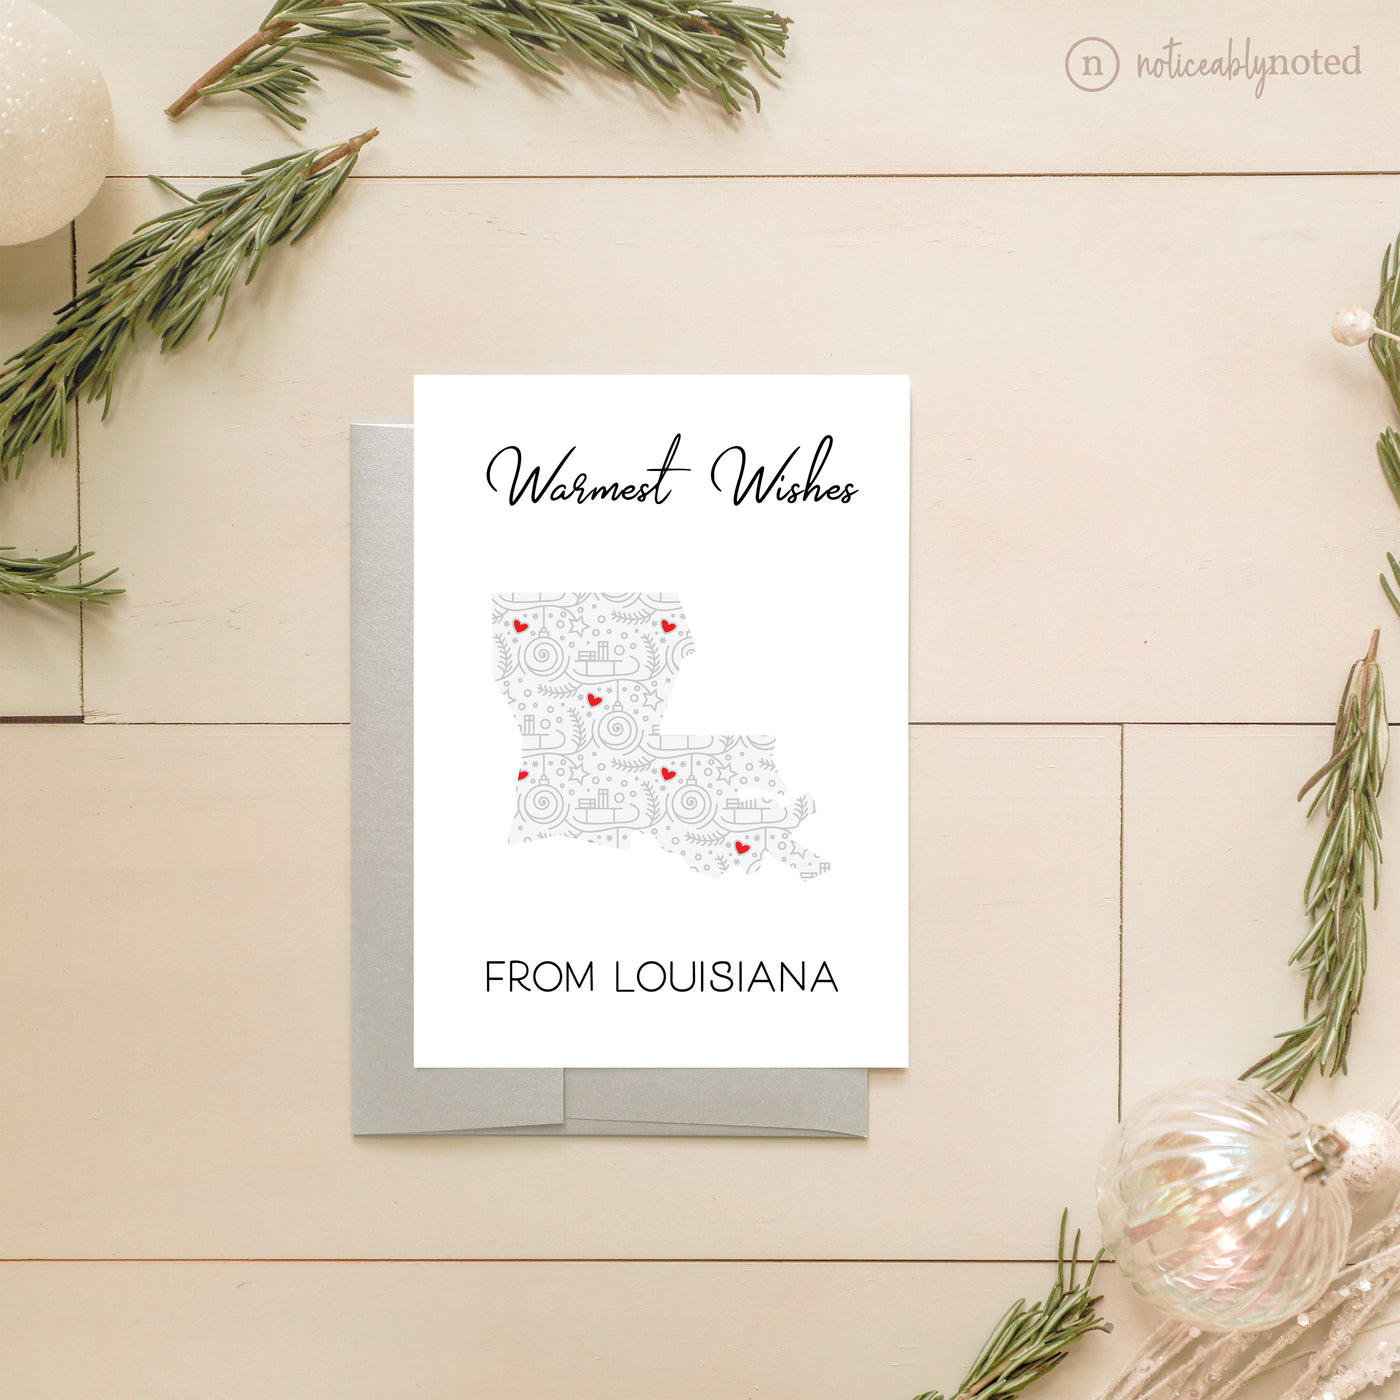 LA Holiday Greeting Cards | Noticeably Noted